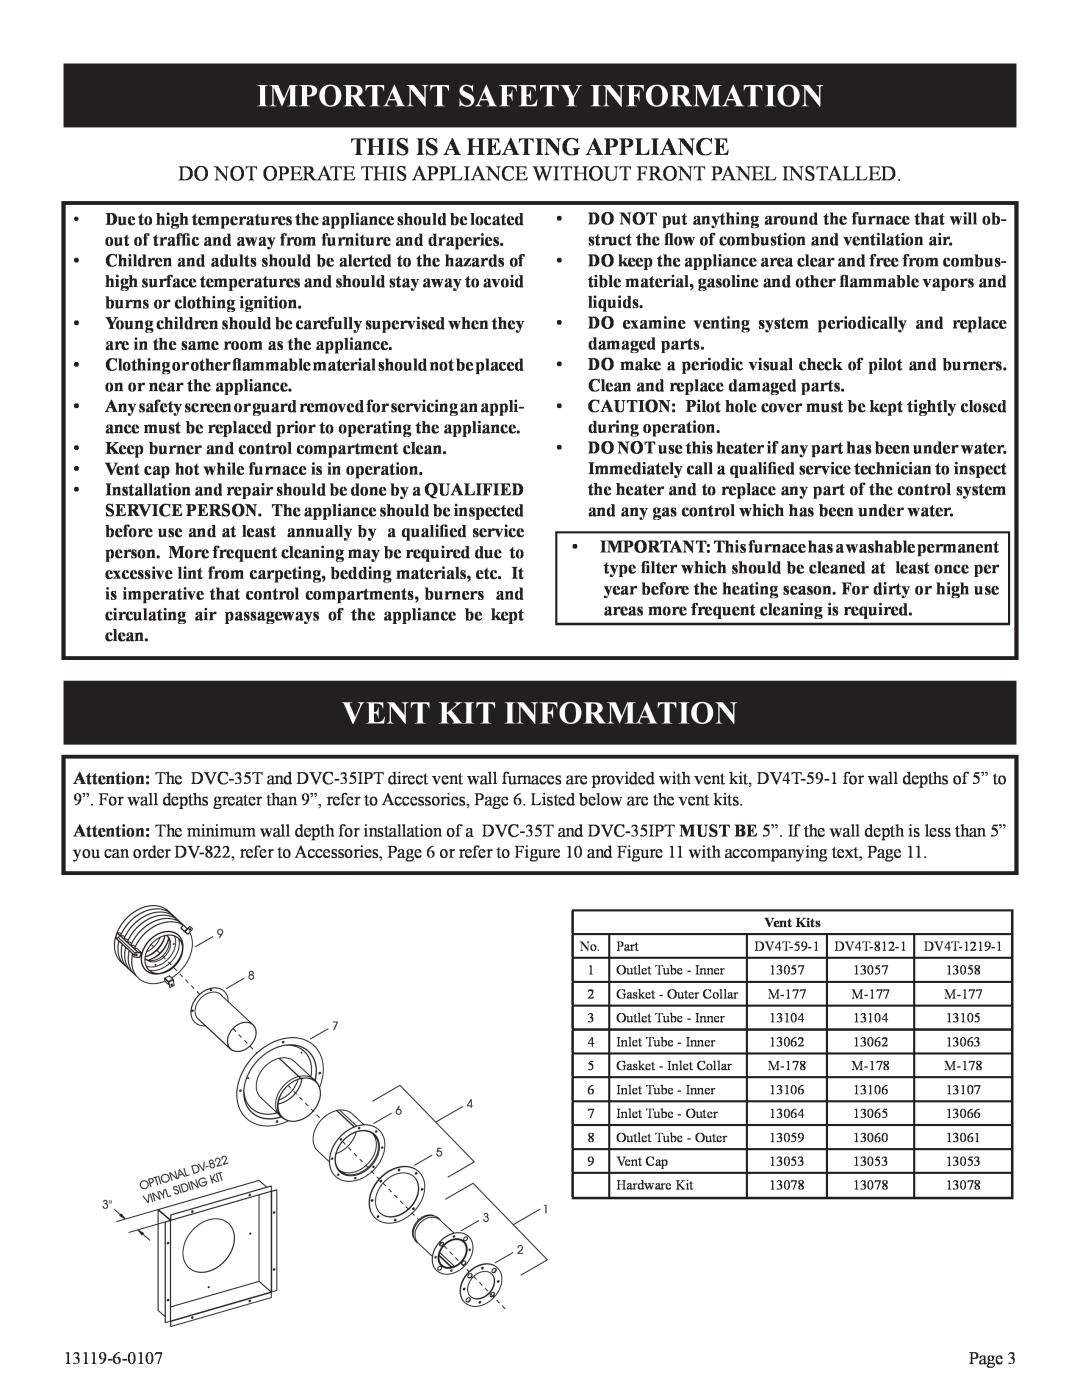 Empire Products DVC-35T-1, DVC-35IPT-1 Important Safety Information, Vent Kit Information, This Is A Heating Appliance 